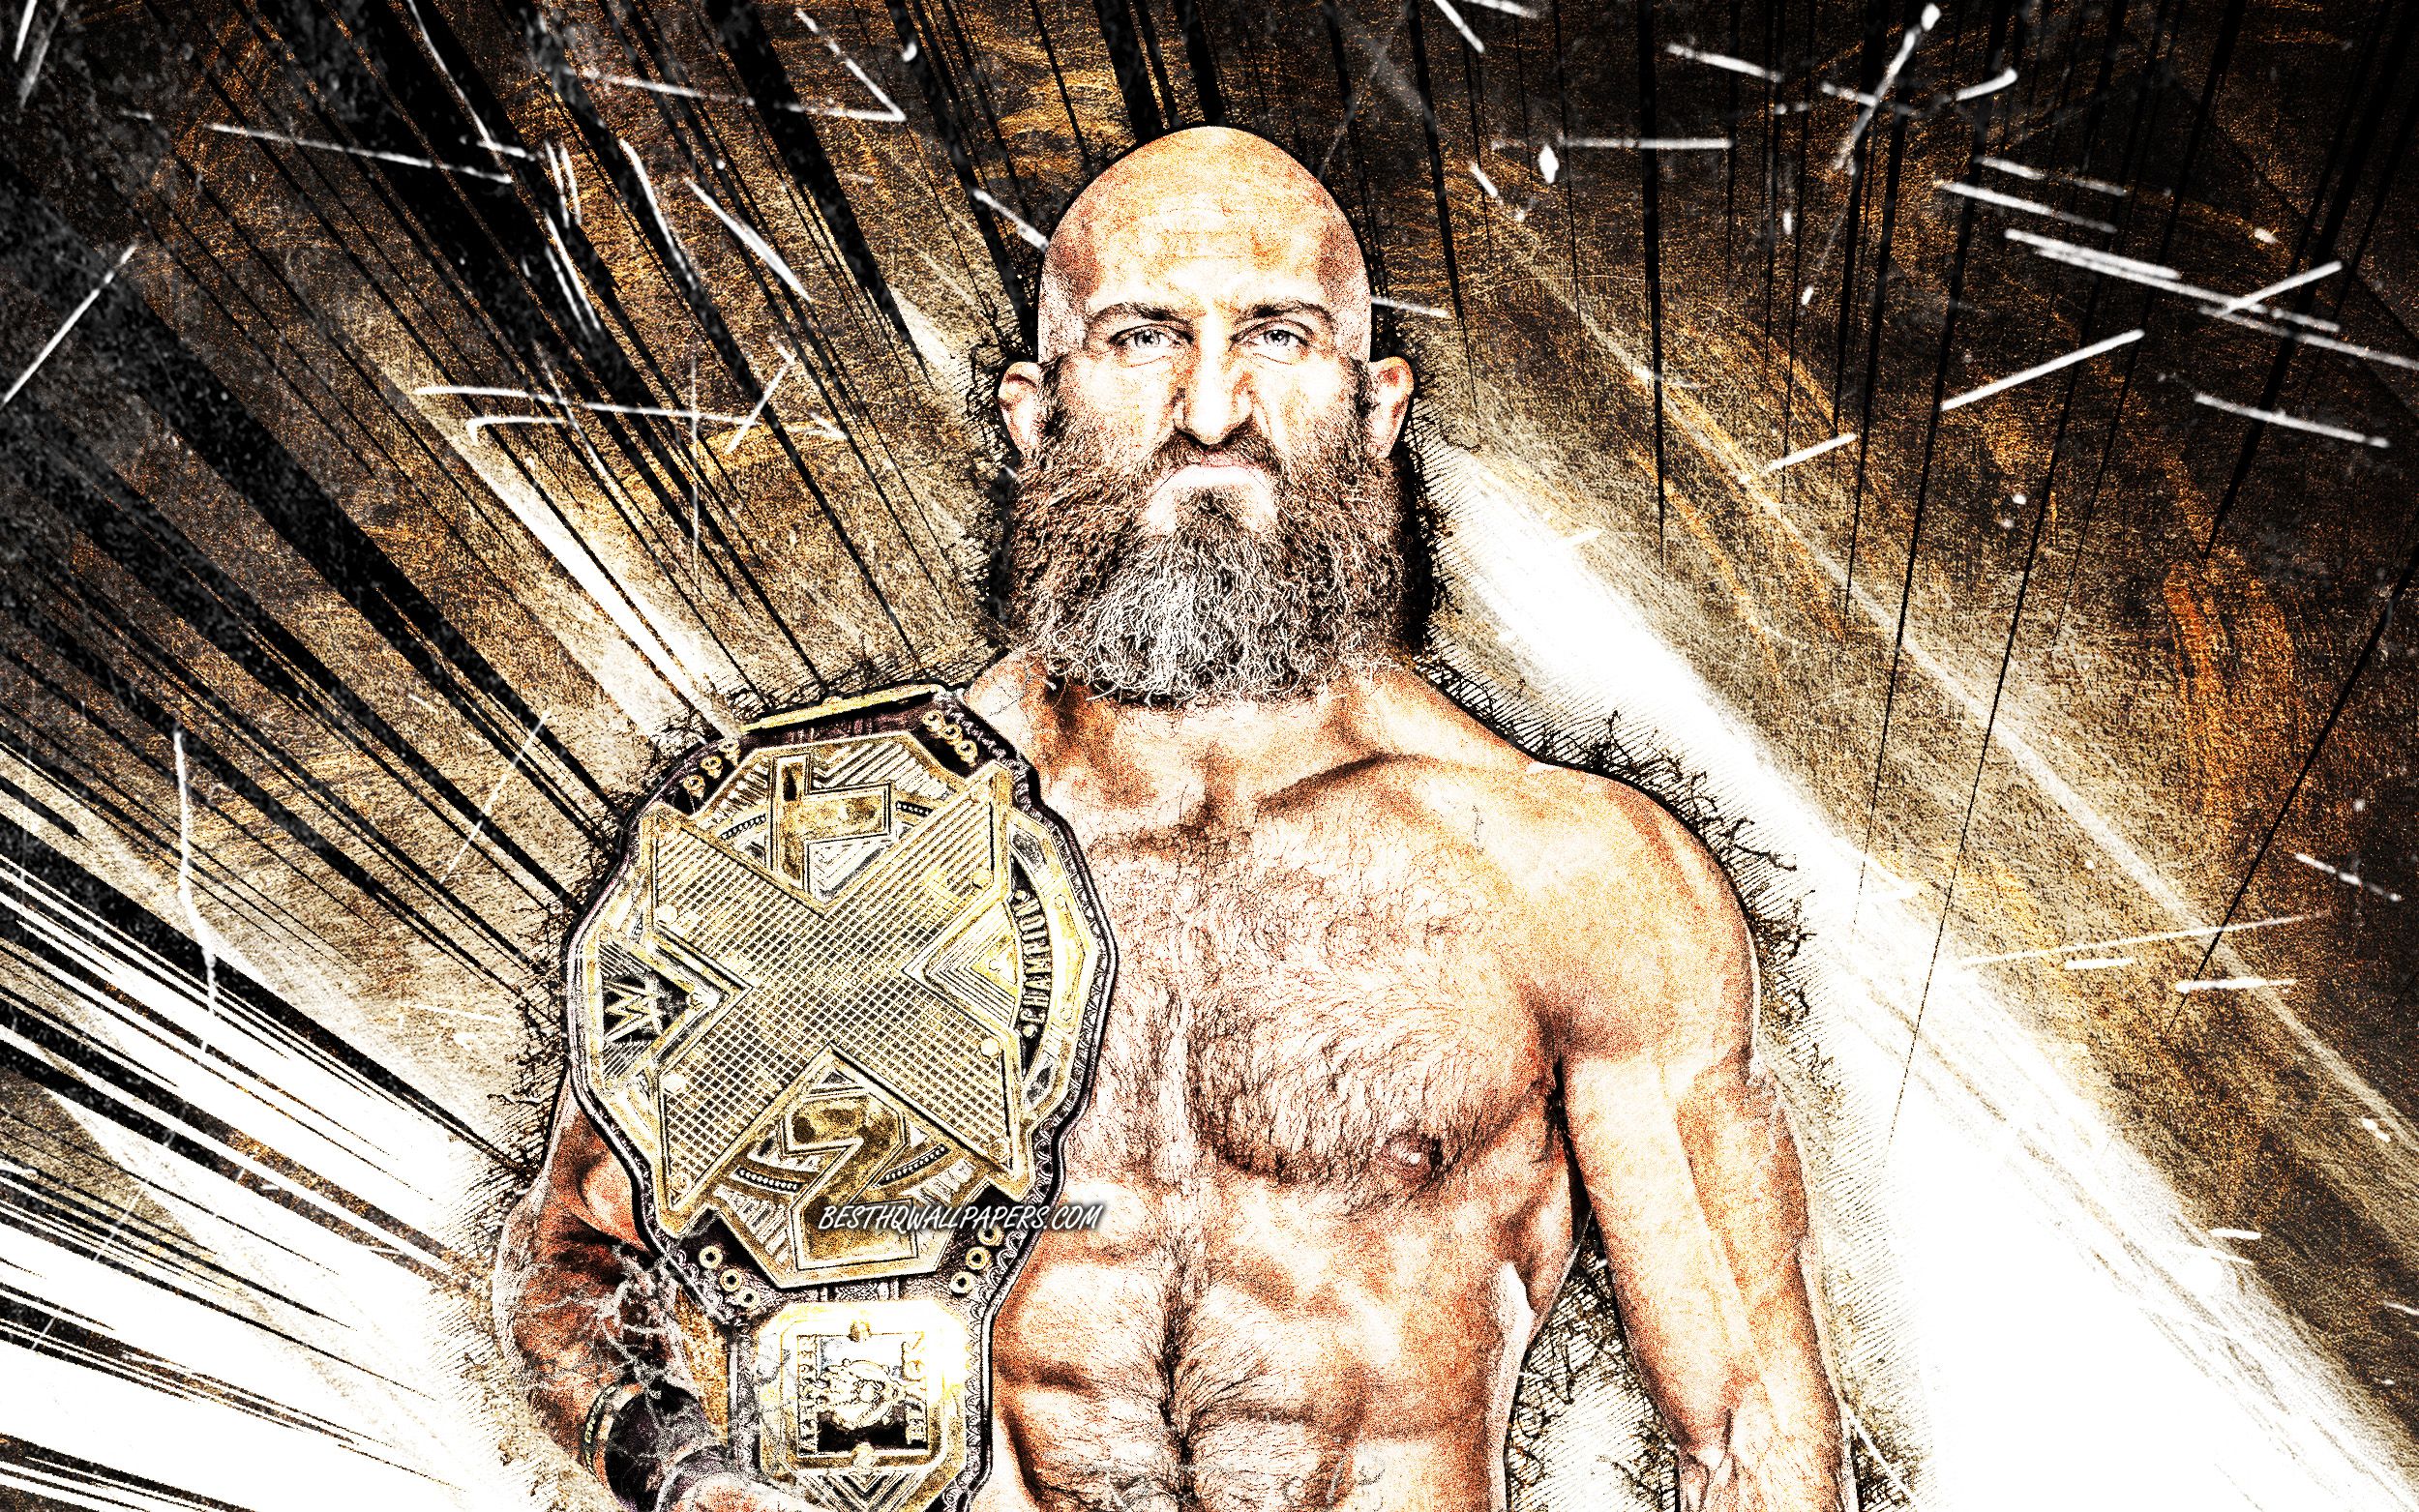 Download wallpaper Tommaso Ciampa, WWE, grunge art, american wrestlers, wrestling, brown abstract rays, Tommaso Whitney, wrestlers for desktop with resolution 2500x1563. High Quality HD picture wallpaper